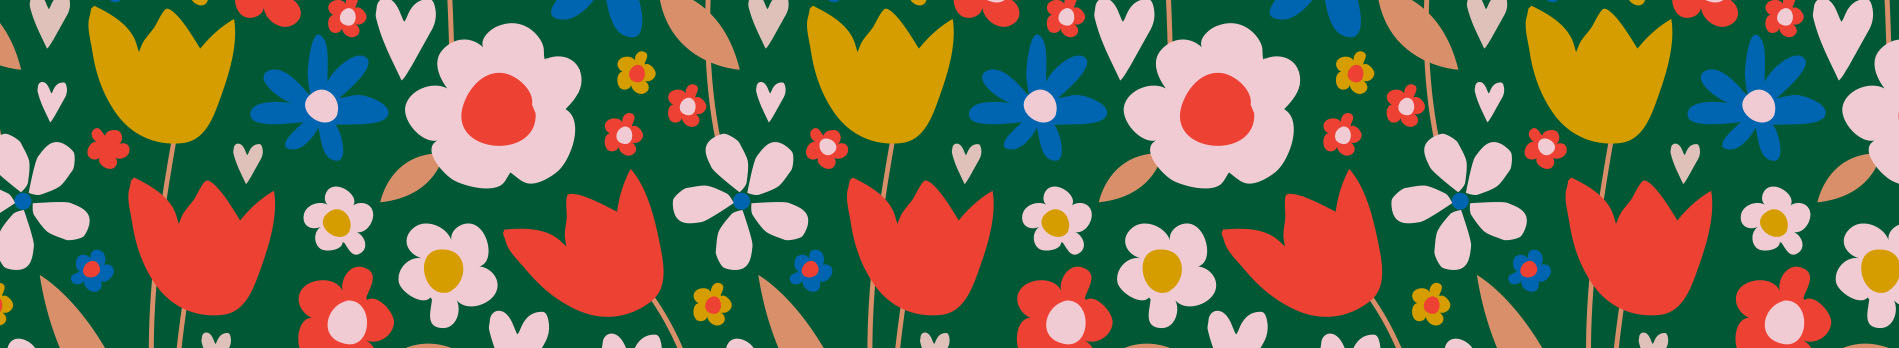 An illustration of flowers in different colors on a deep green background.